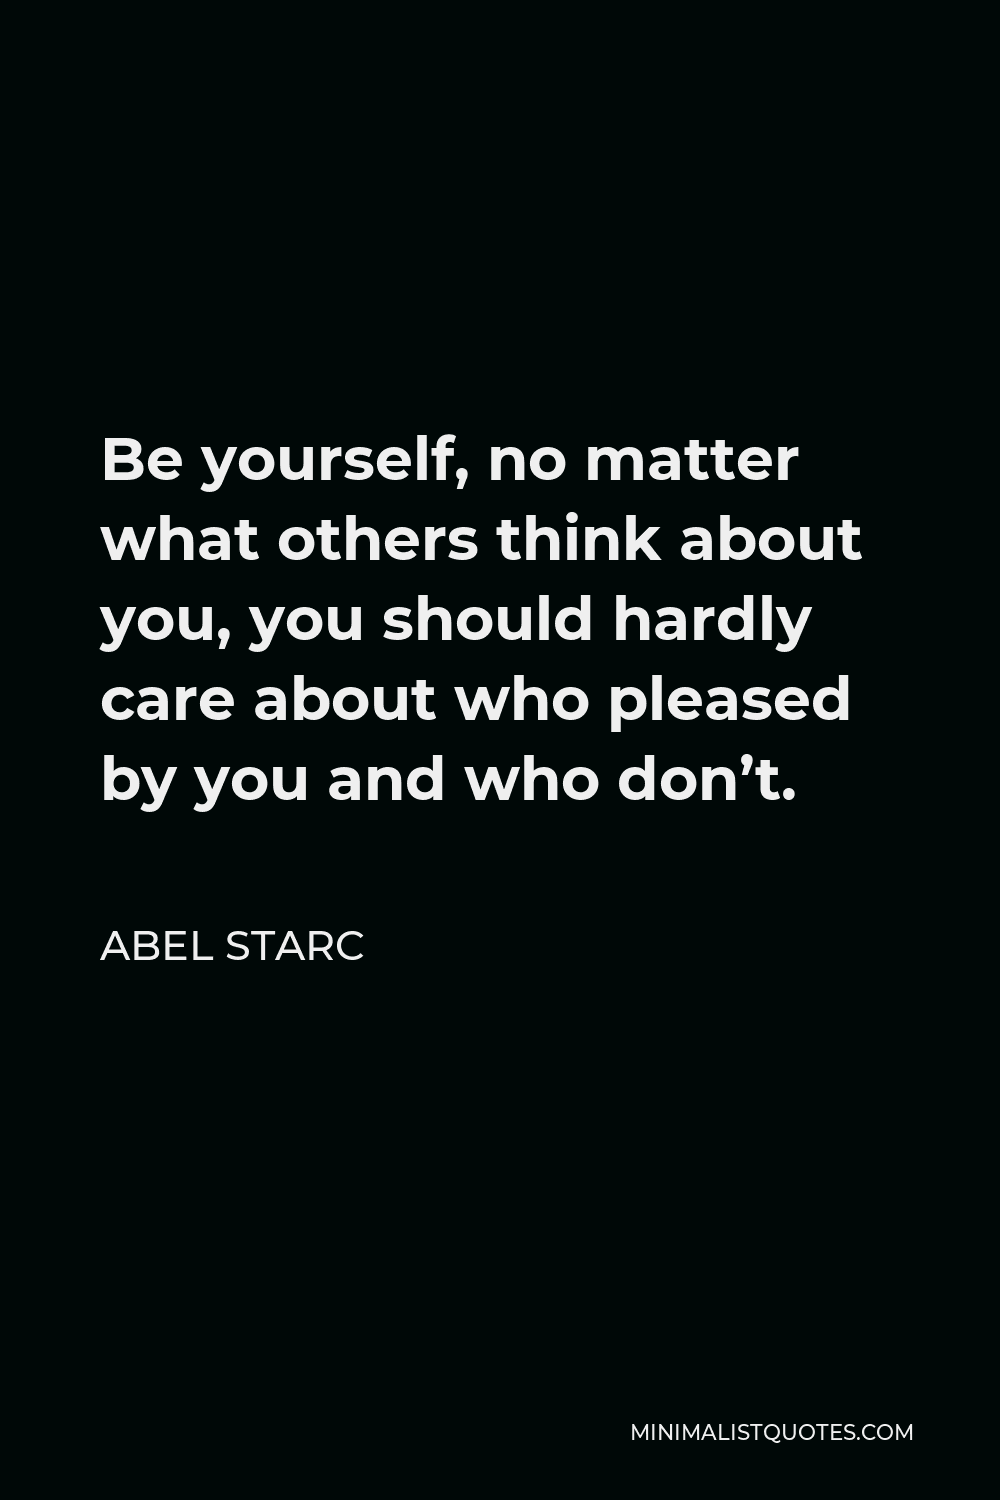 Abel Starc Quote - Be yourself, no matter what others think about you, you should hardly care about who pleased by you and who don’t.